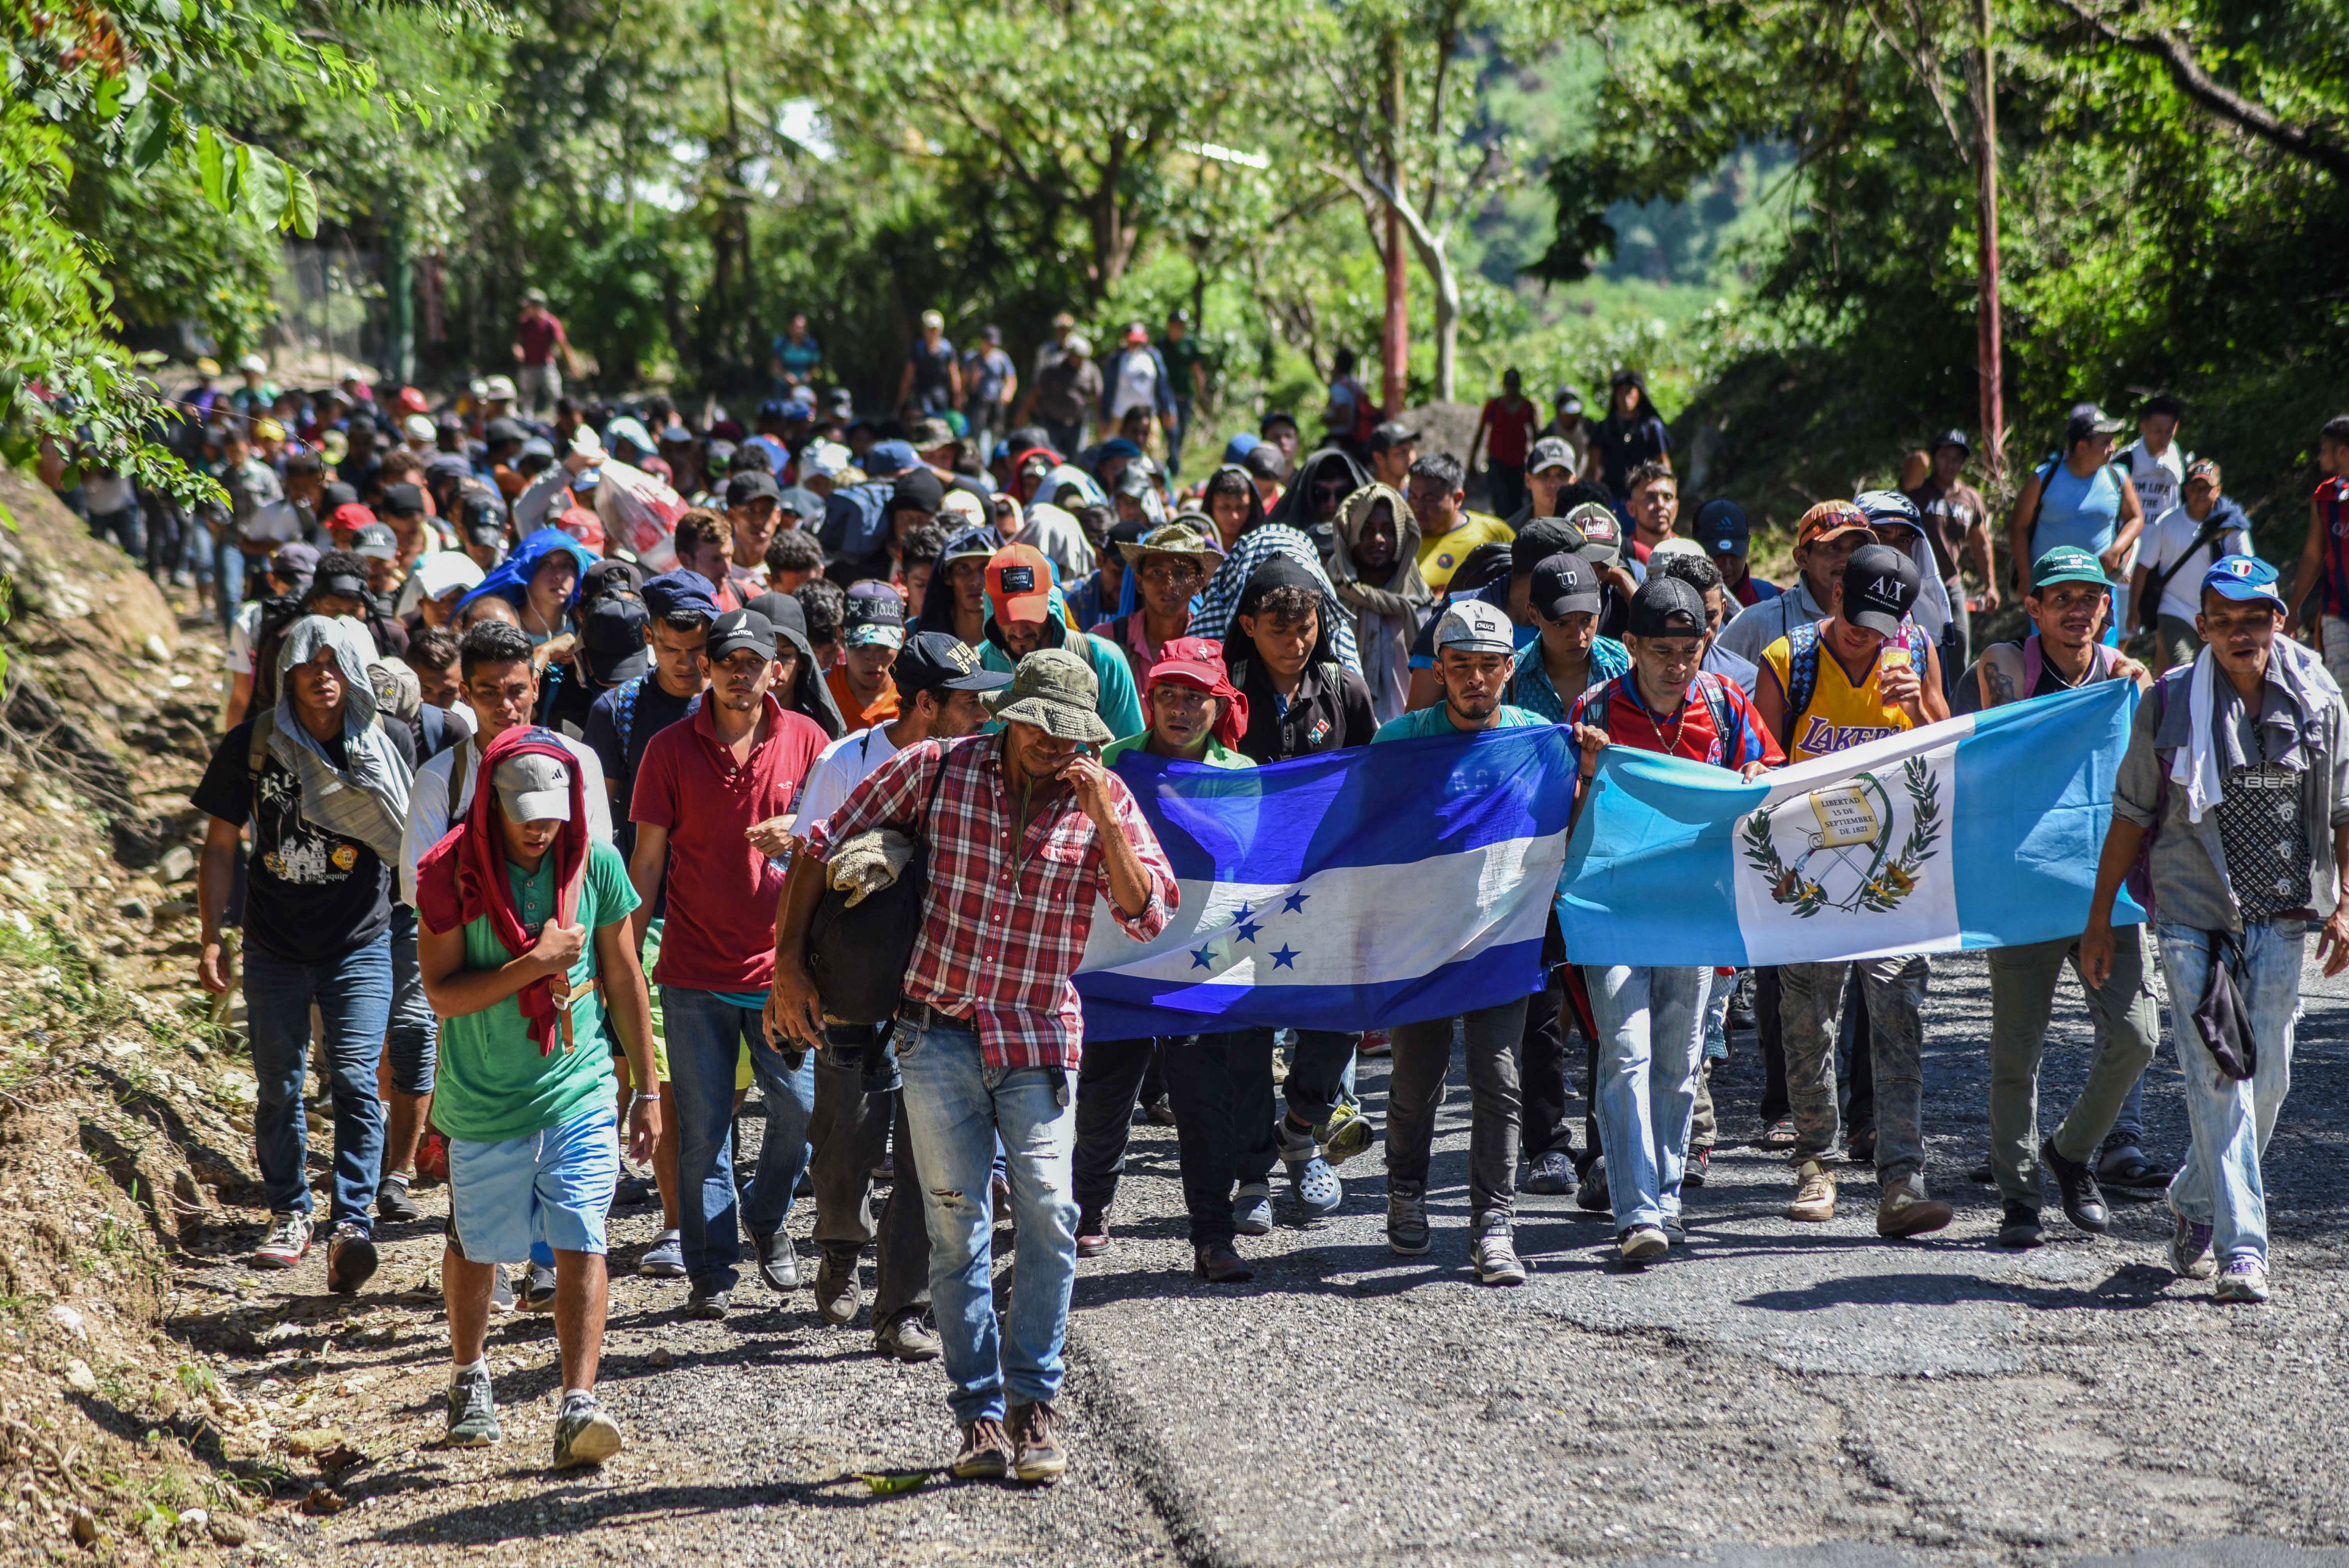 TOPSHOT - Honduran migrants take part in a new caravan heading to the US with Honduran and Guatemalan national flags in Quezaltepeque, Chiquimula, Guatemala on October 22, 2018. - US President Donald Trump on Monday called the migrant caravan heading toward the US-Mexico border a national emergency, saying he has alerted the US border patrol and military. (Photo by ORLANDO ESTRADA / AFP) (Photo credit should read ORLANDO ESTRADA/AFP/Getty Images)